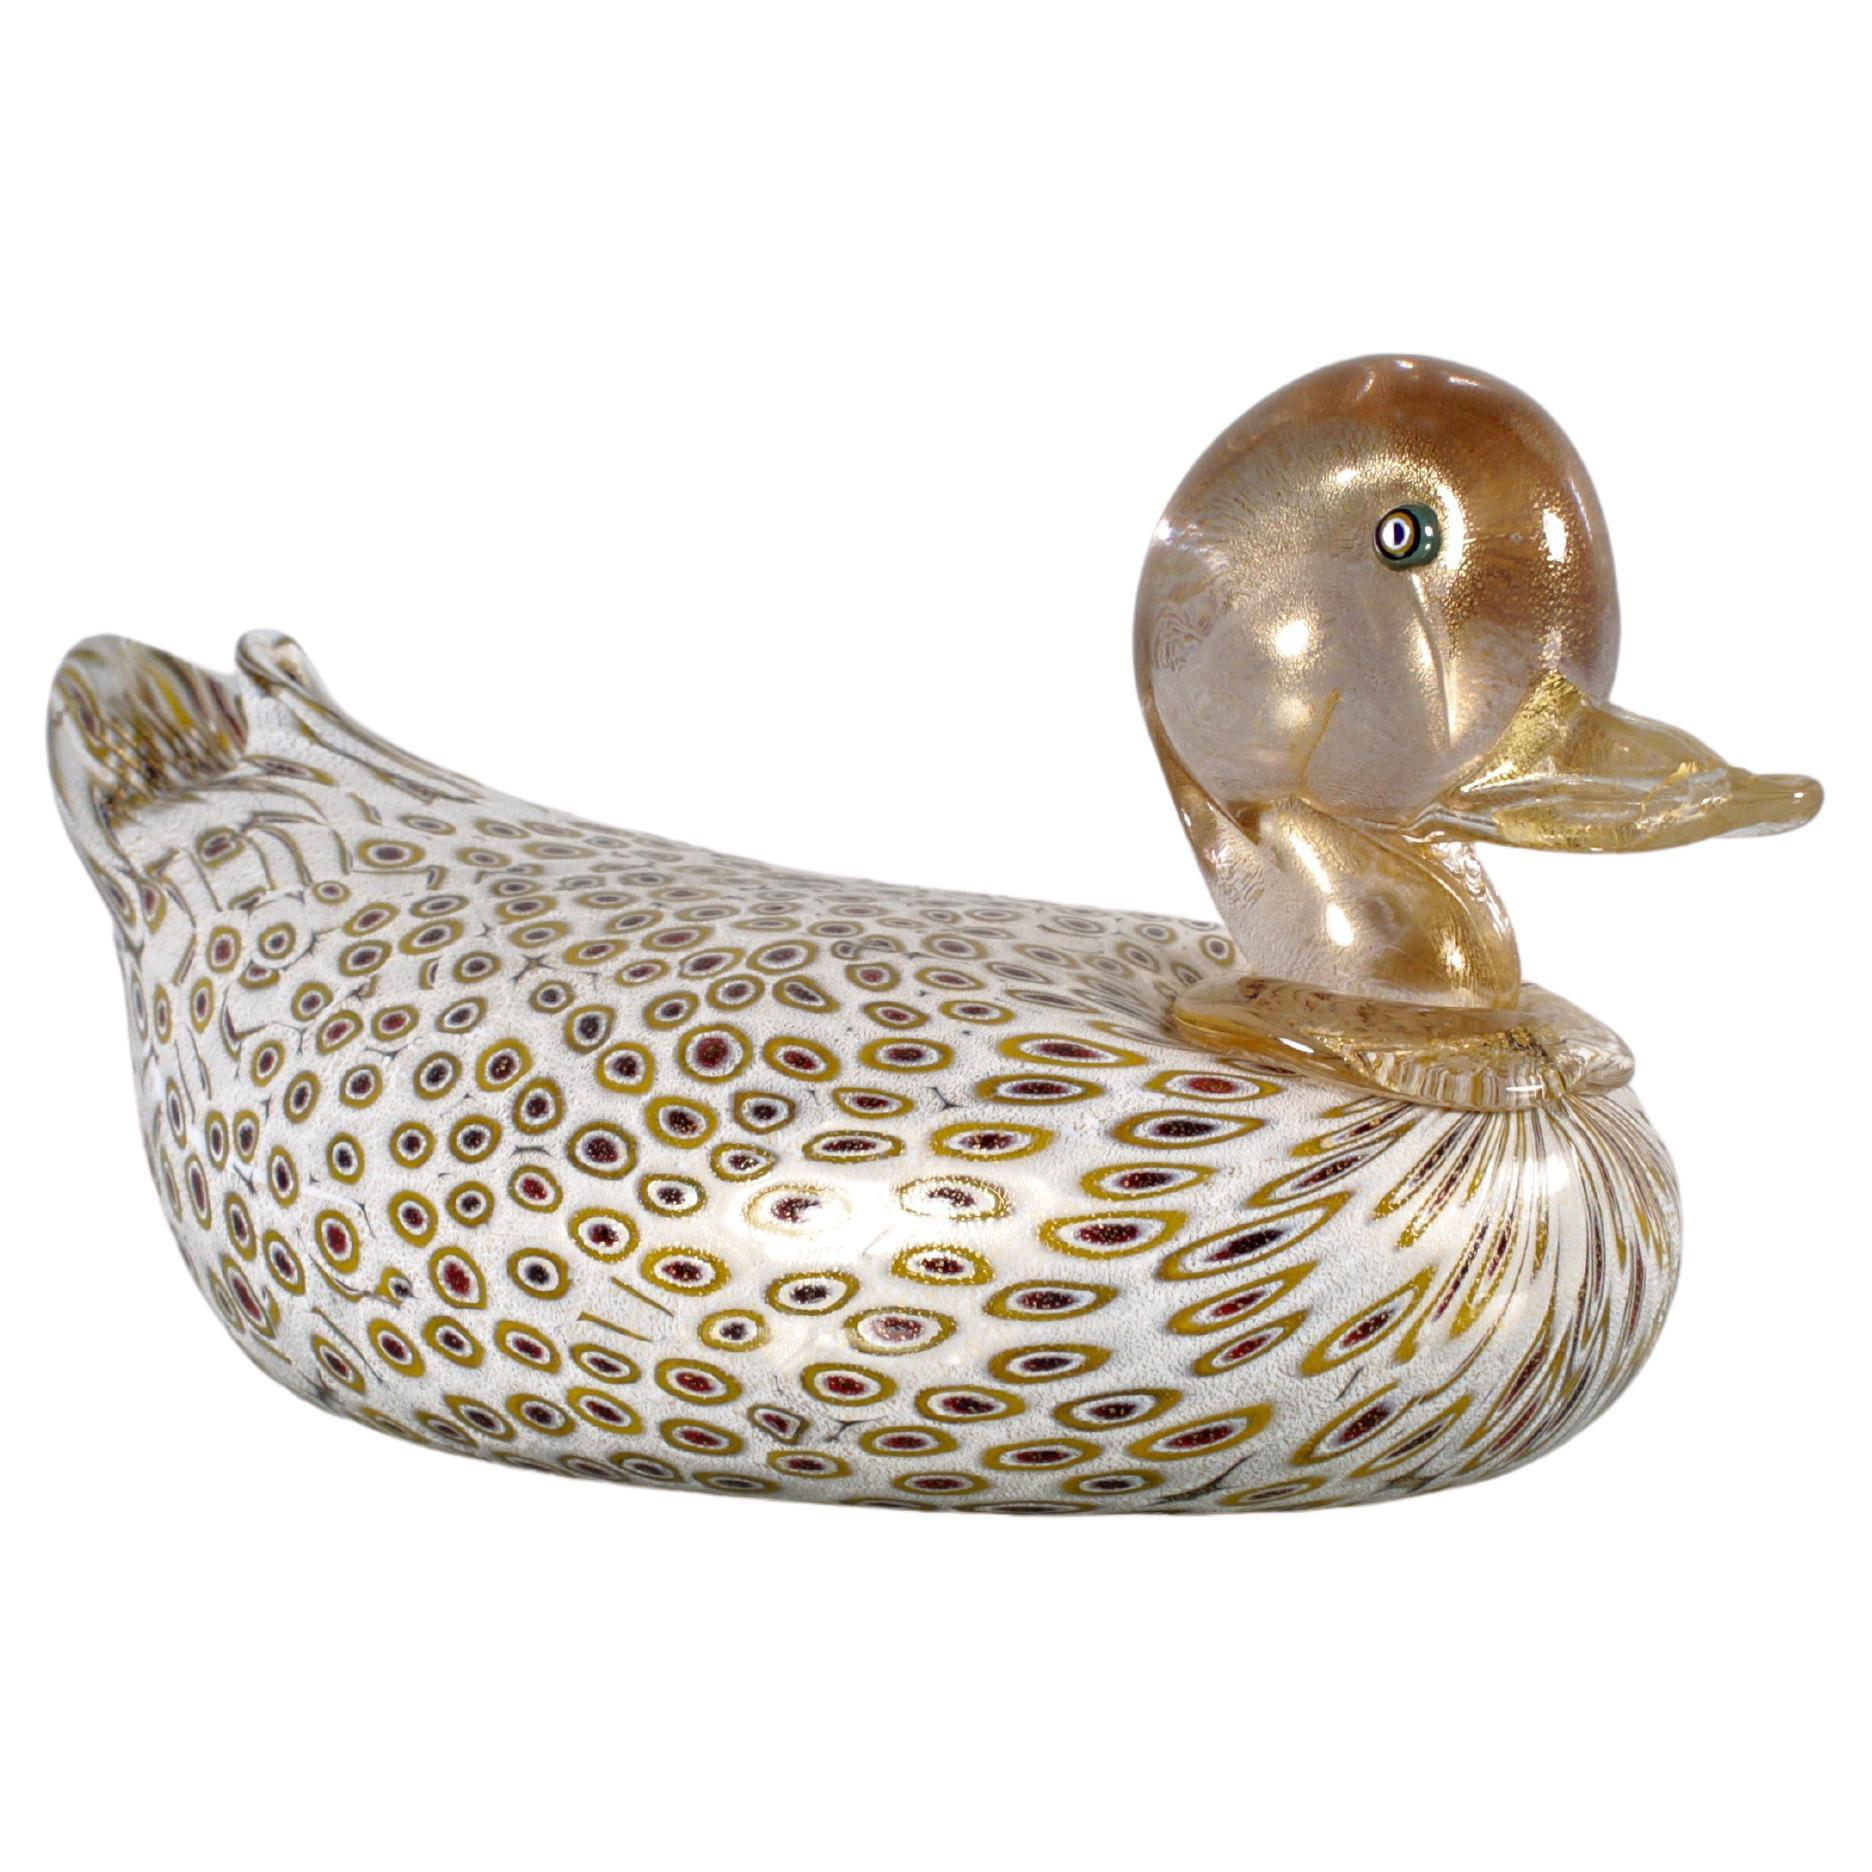 A. Barbini (attr.) Murano Glass Duck Sculpture with Murrine 60s Italy For Sale